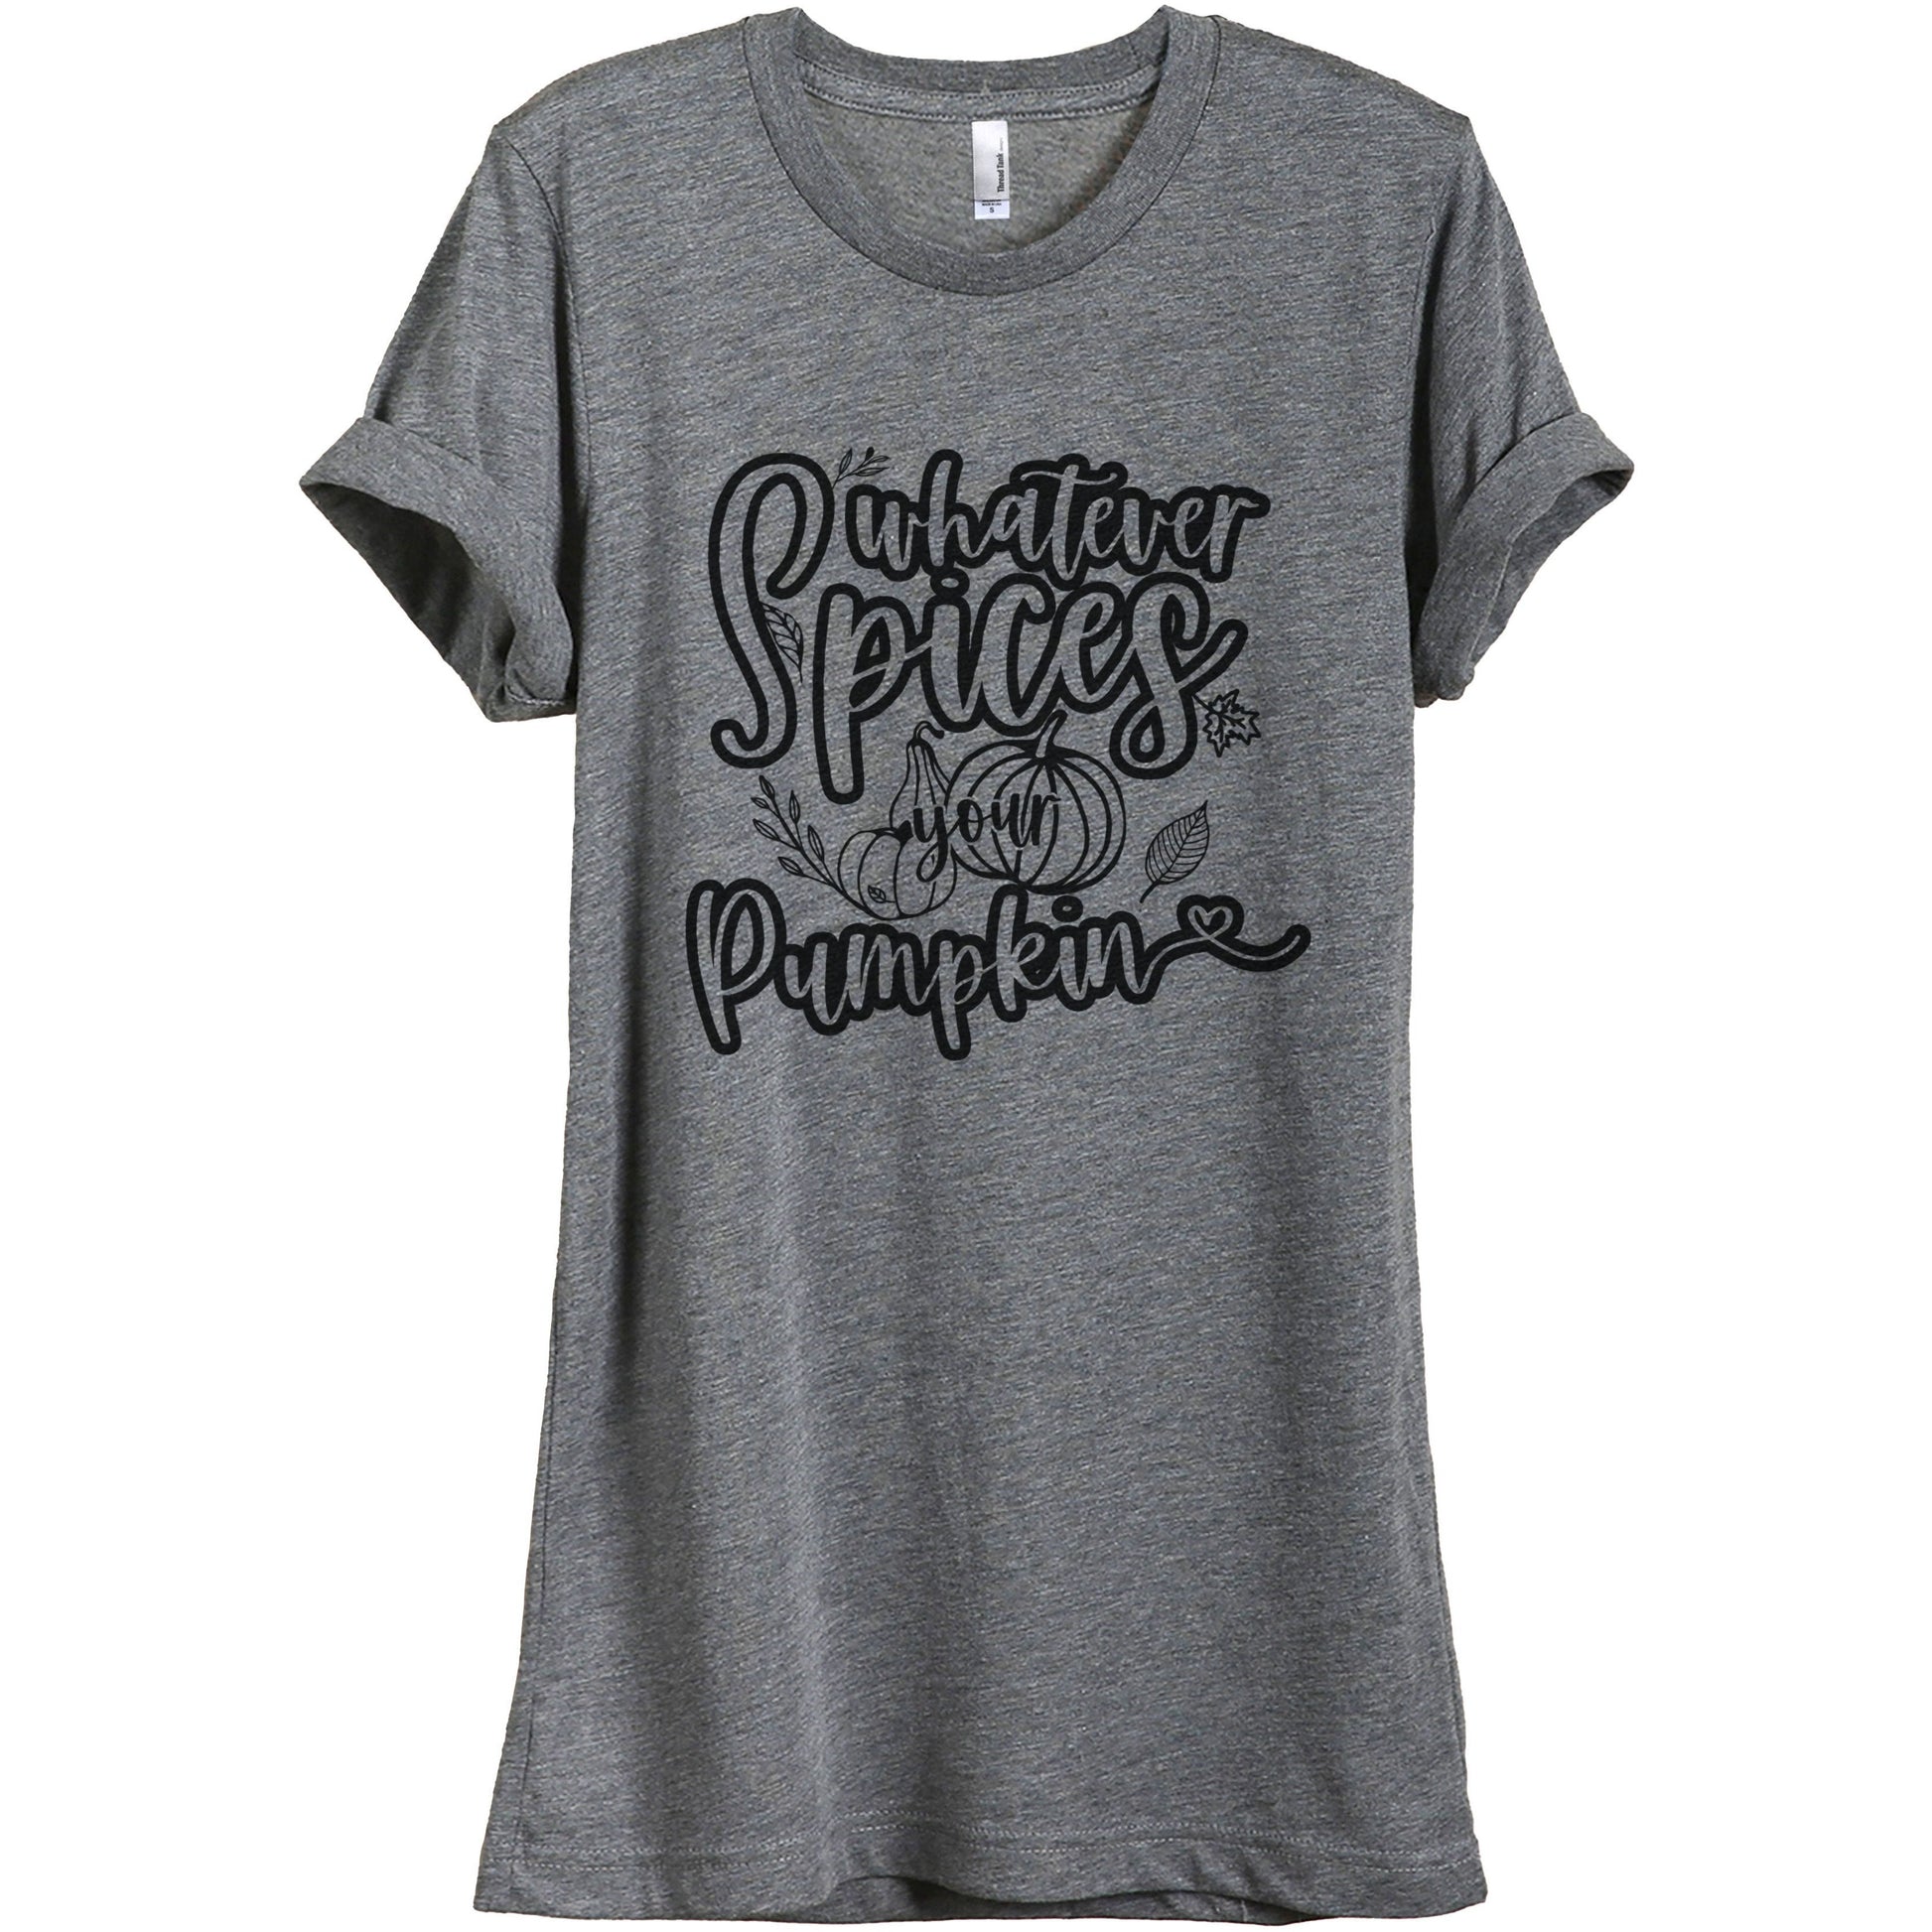 Whatever Spices Your Pumpkin - thread tank | Stories you can wear.